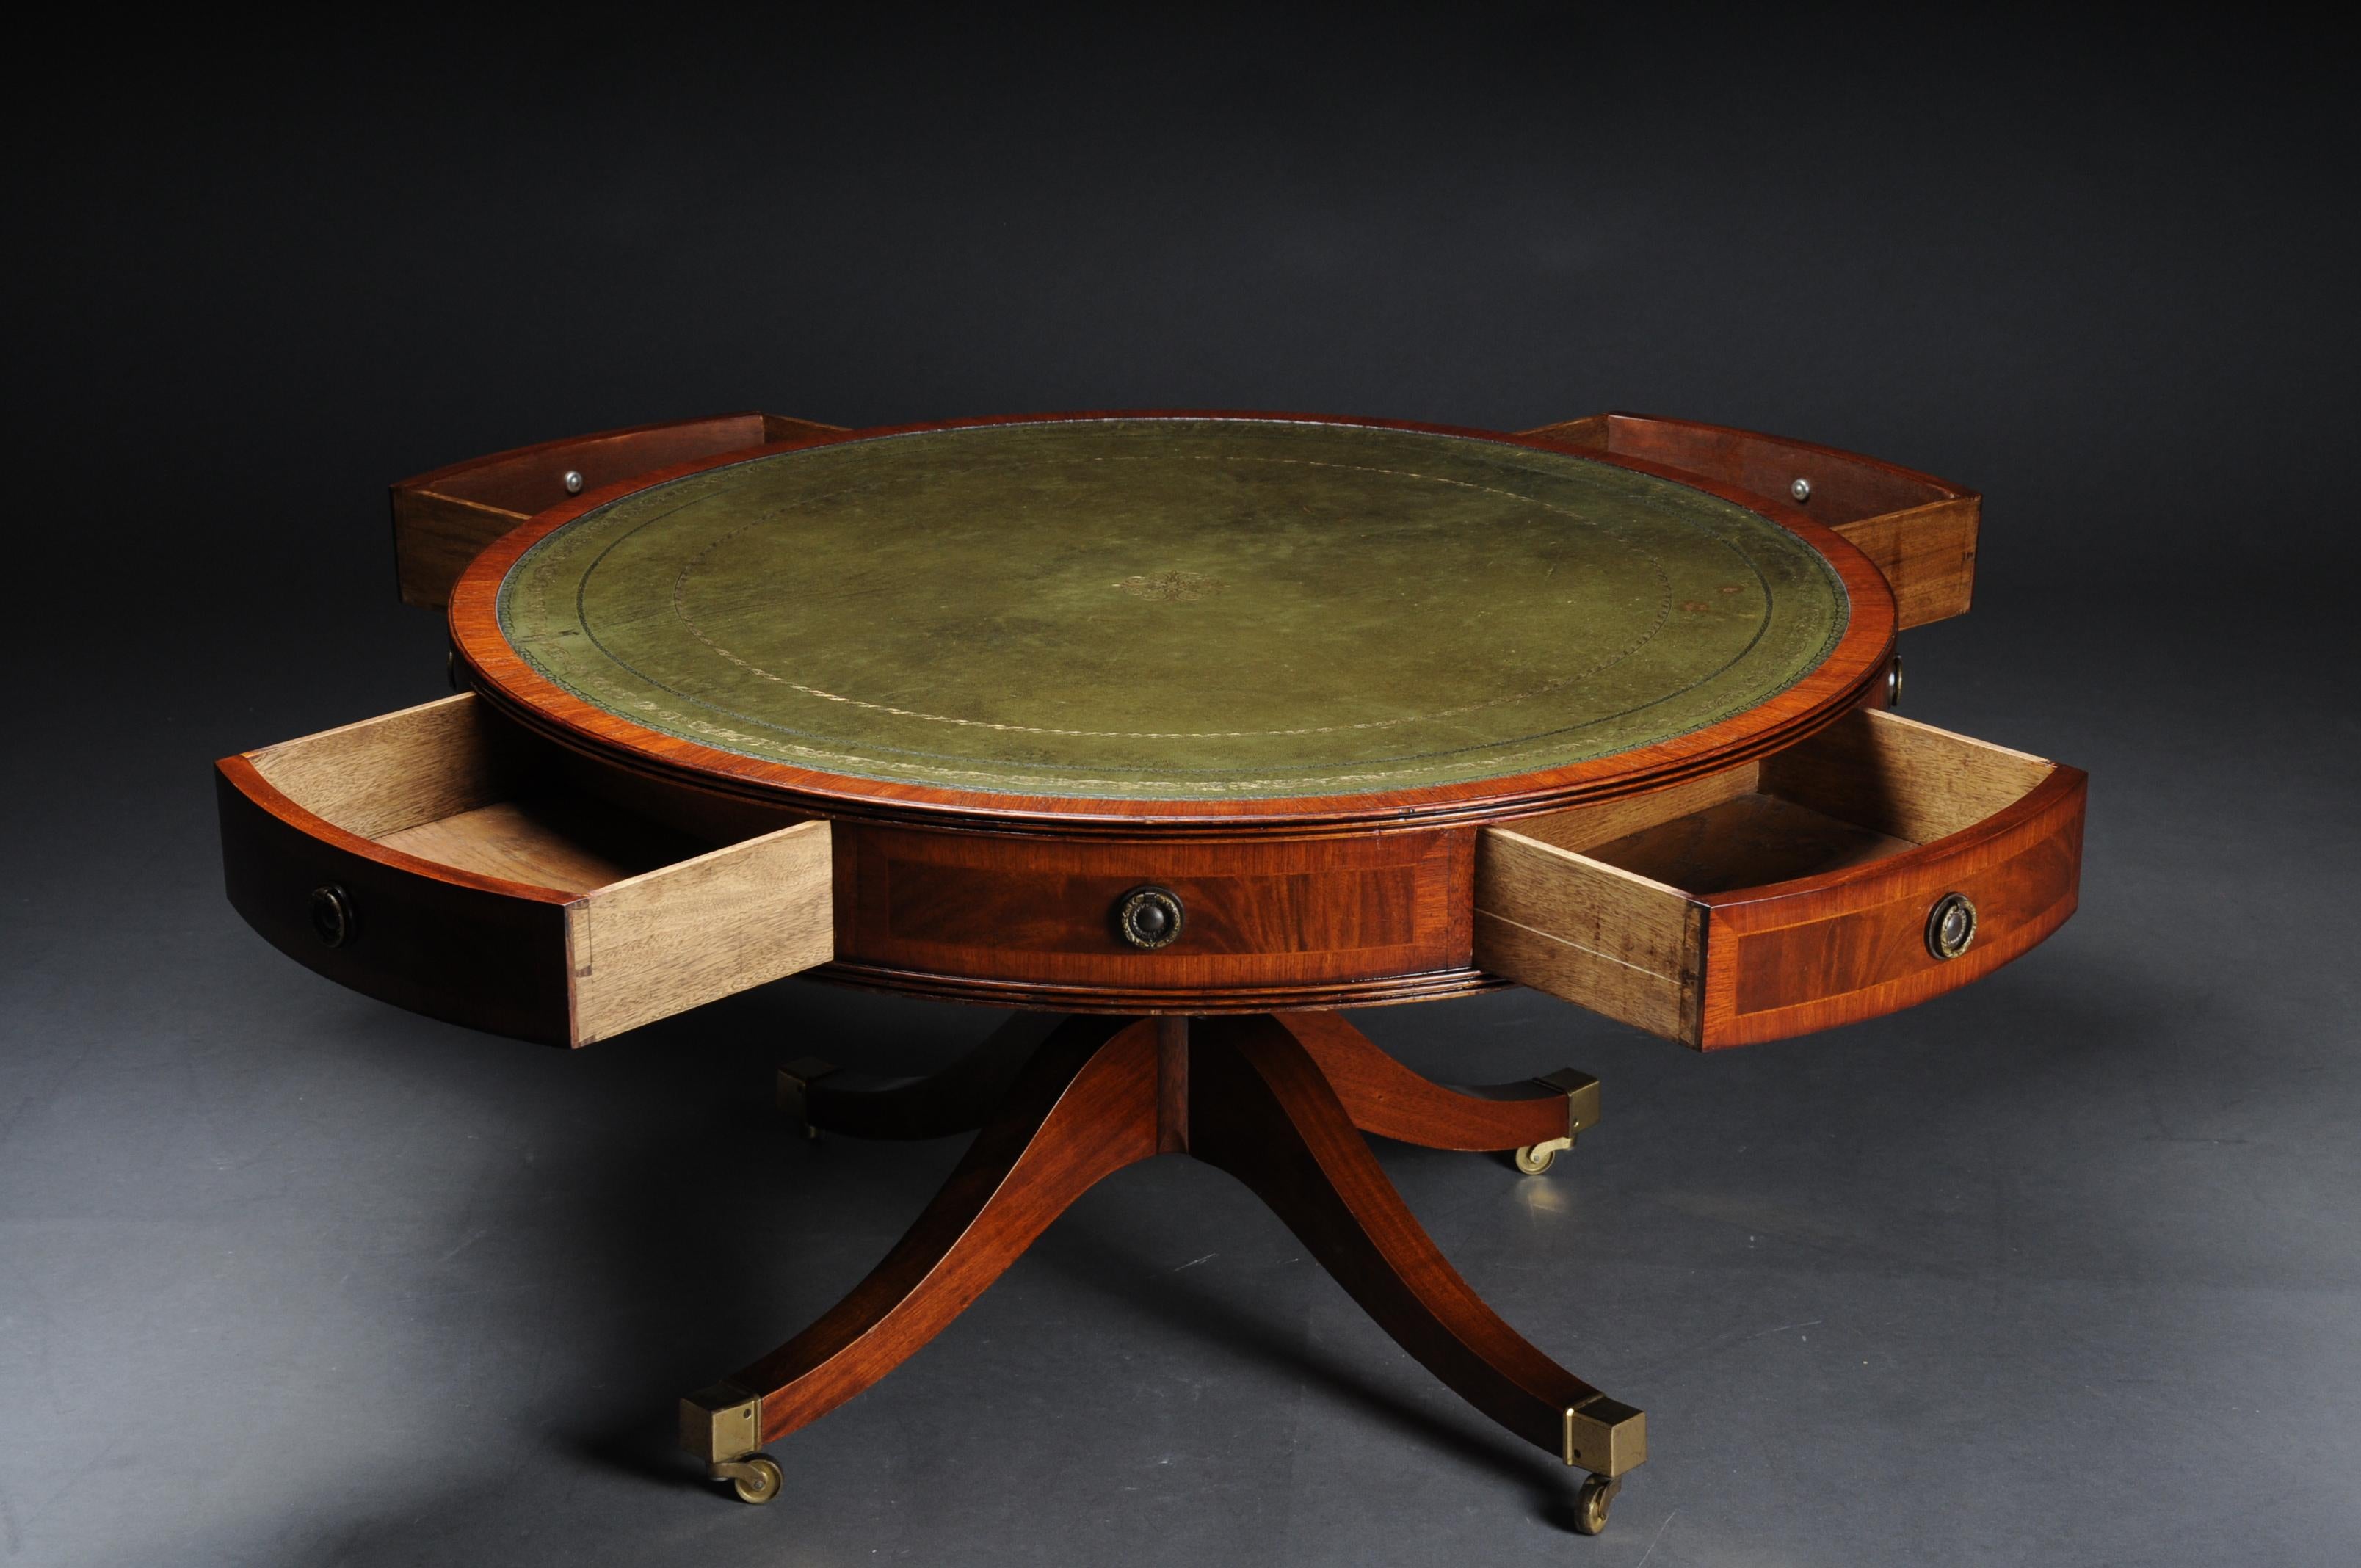 Round English coffee table Chesterfield table, circa 1900

Solid wood, round drawer with four drawers. Classic green leather plate with gold embossing. Table top standing on four legs ending with brass roller feet. Victorian England, circa